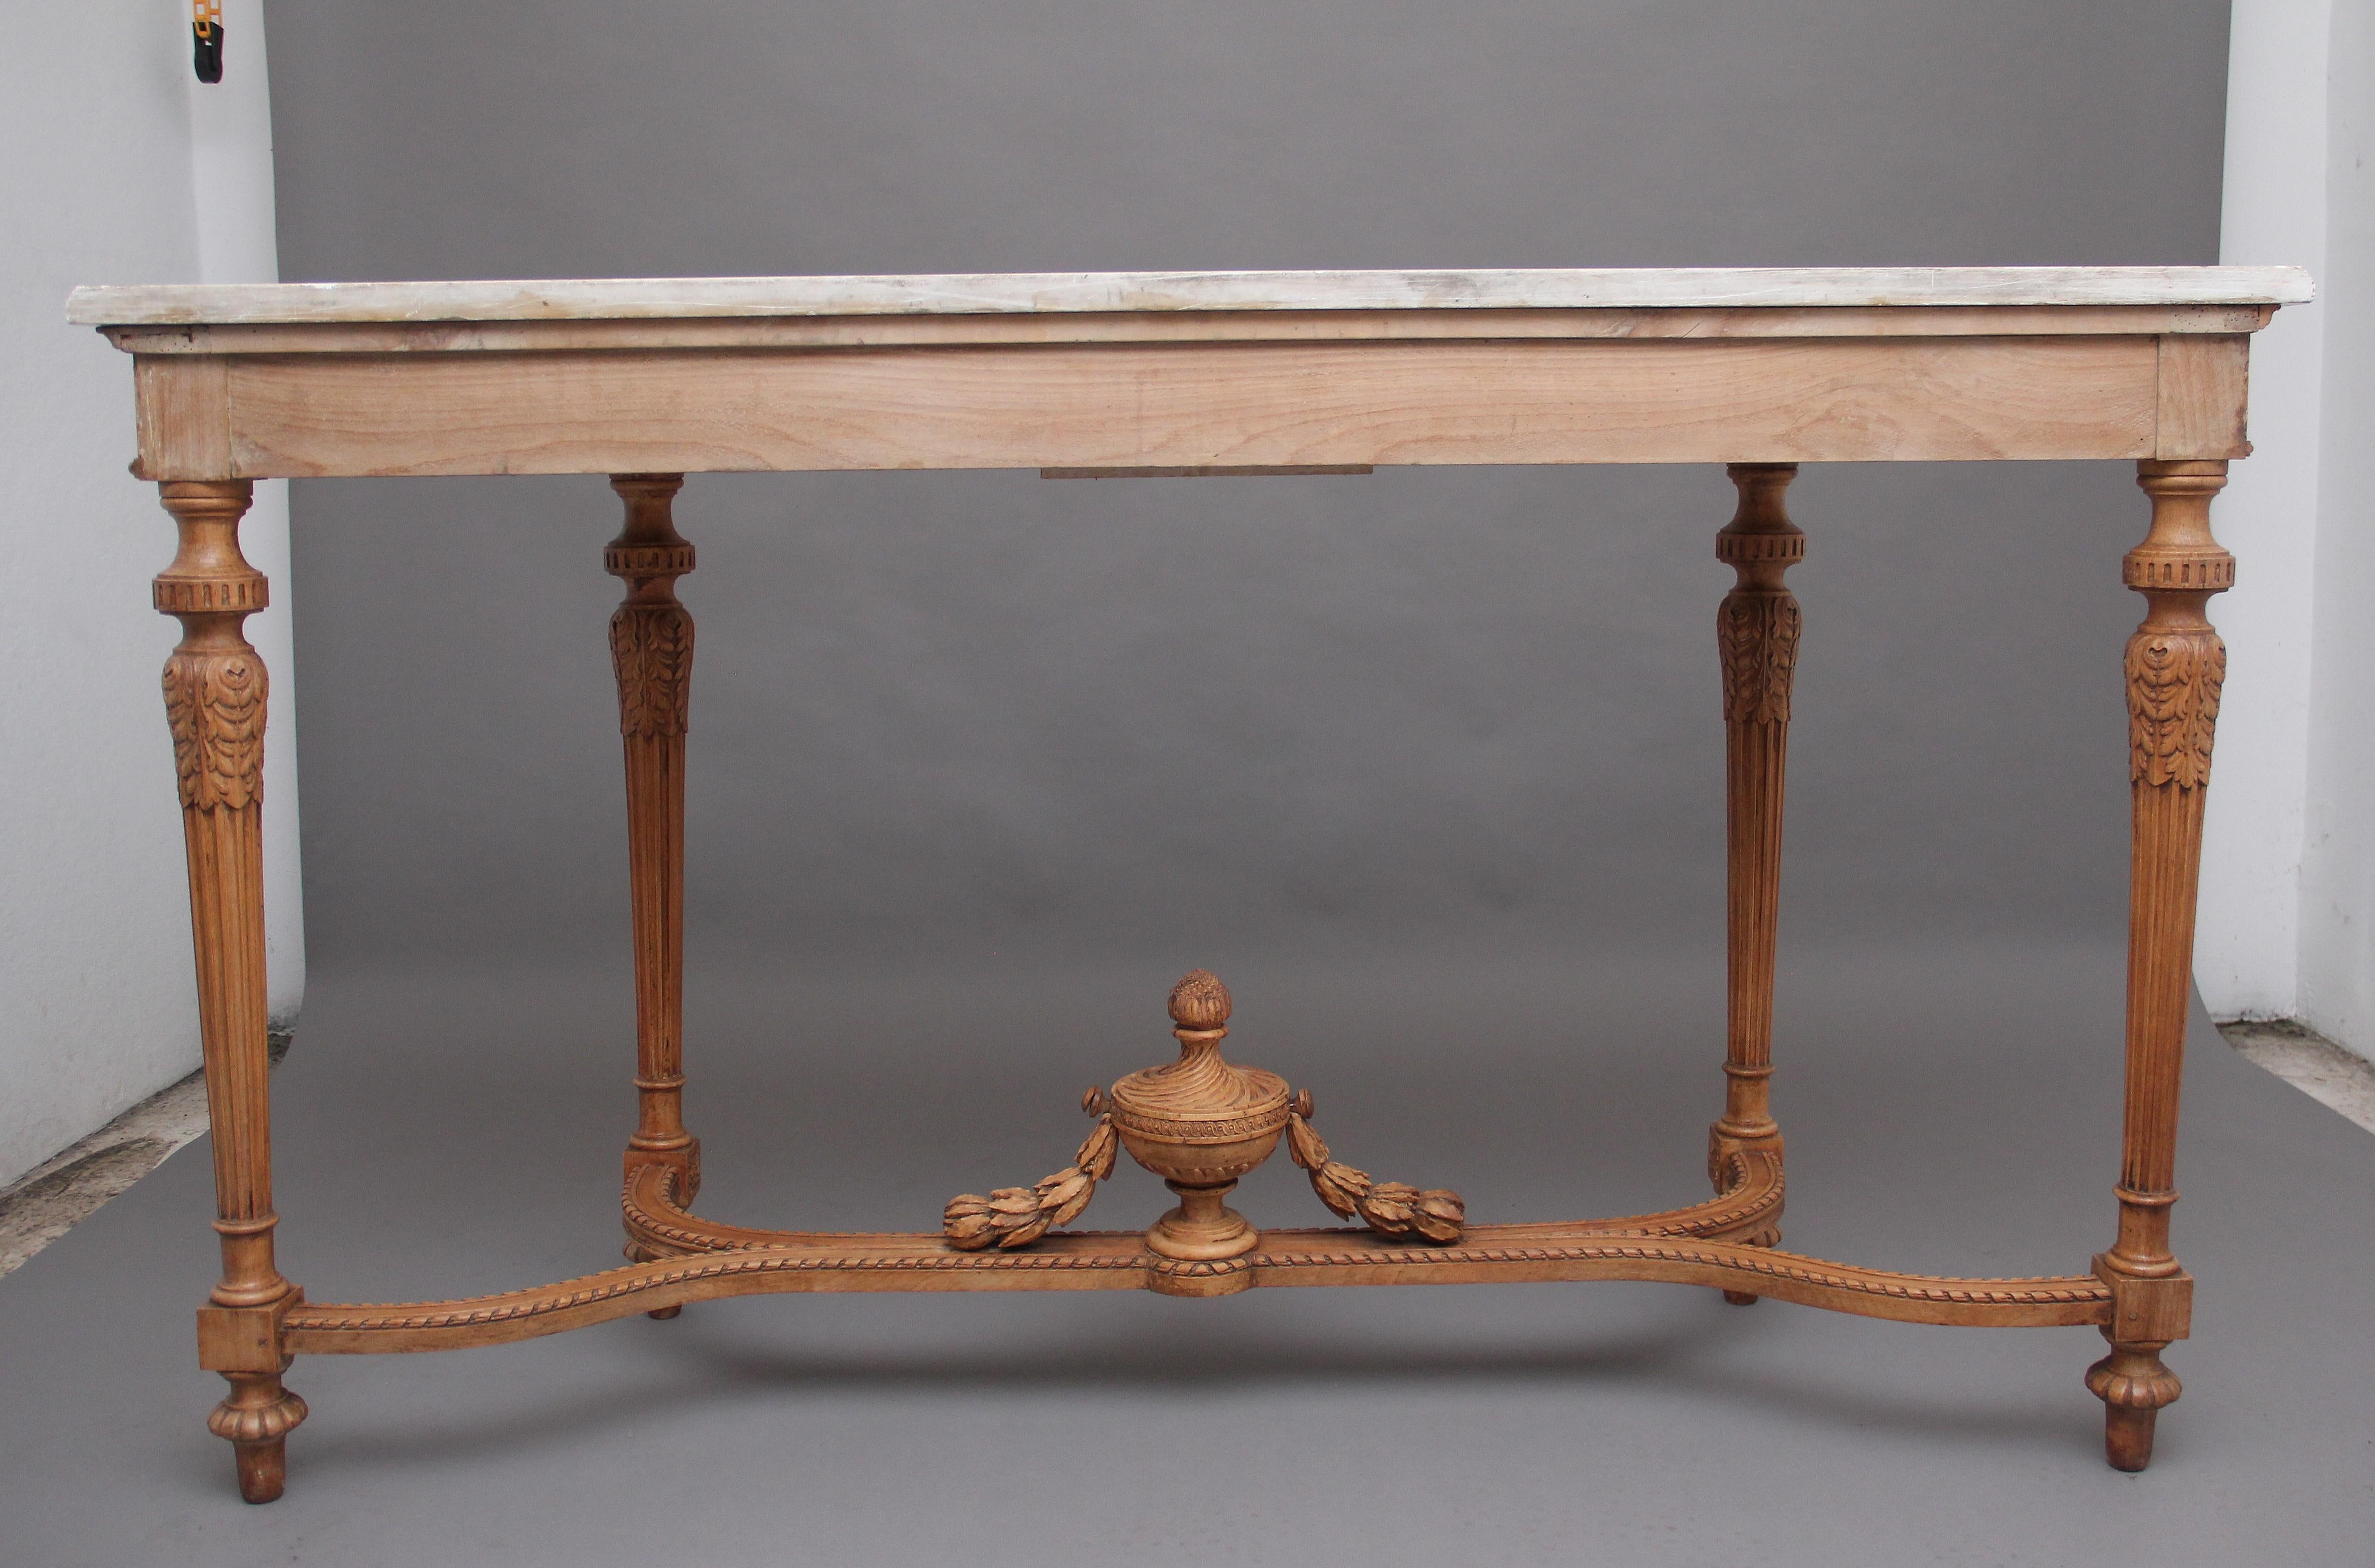 British 18th Century Pine and Marble Console Table